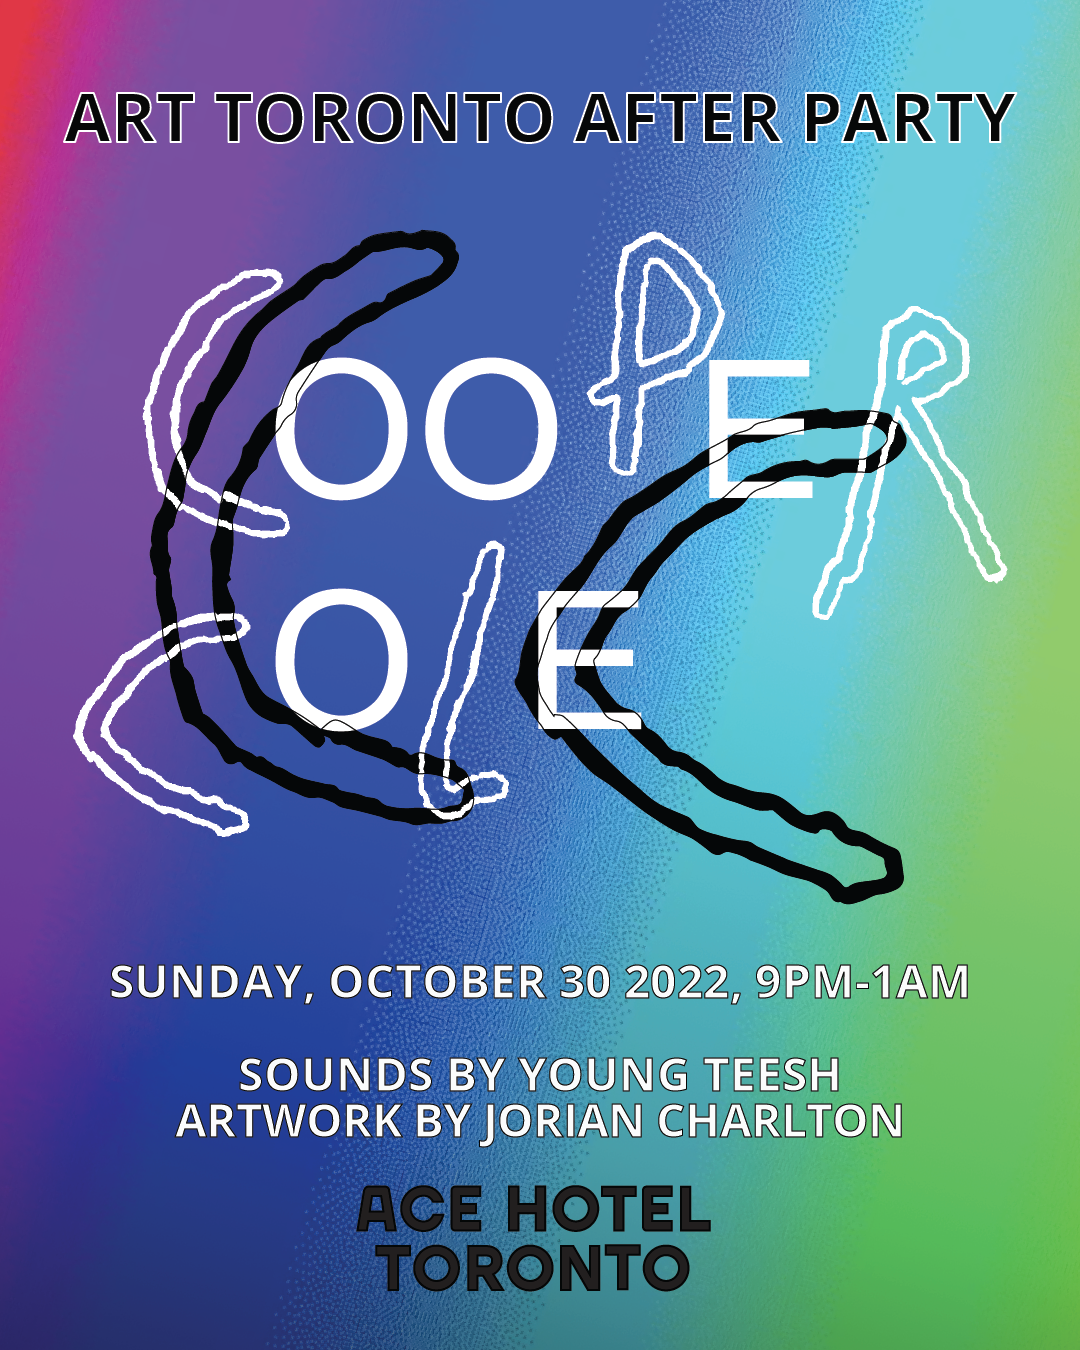 Art Toronto After Party: Cooper Cole promo